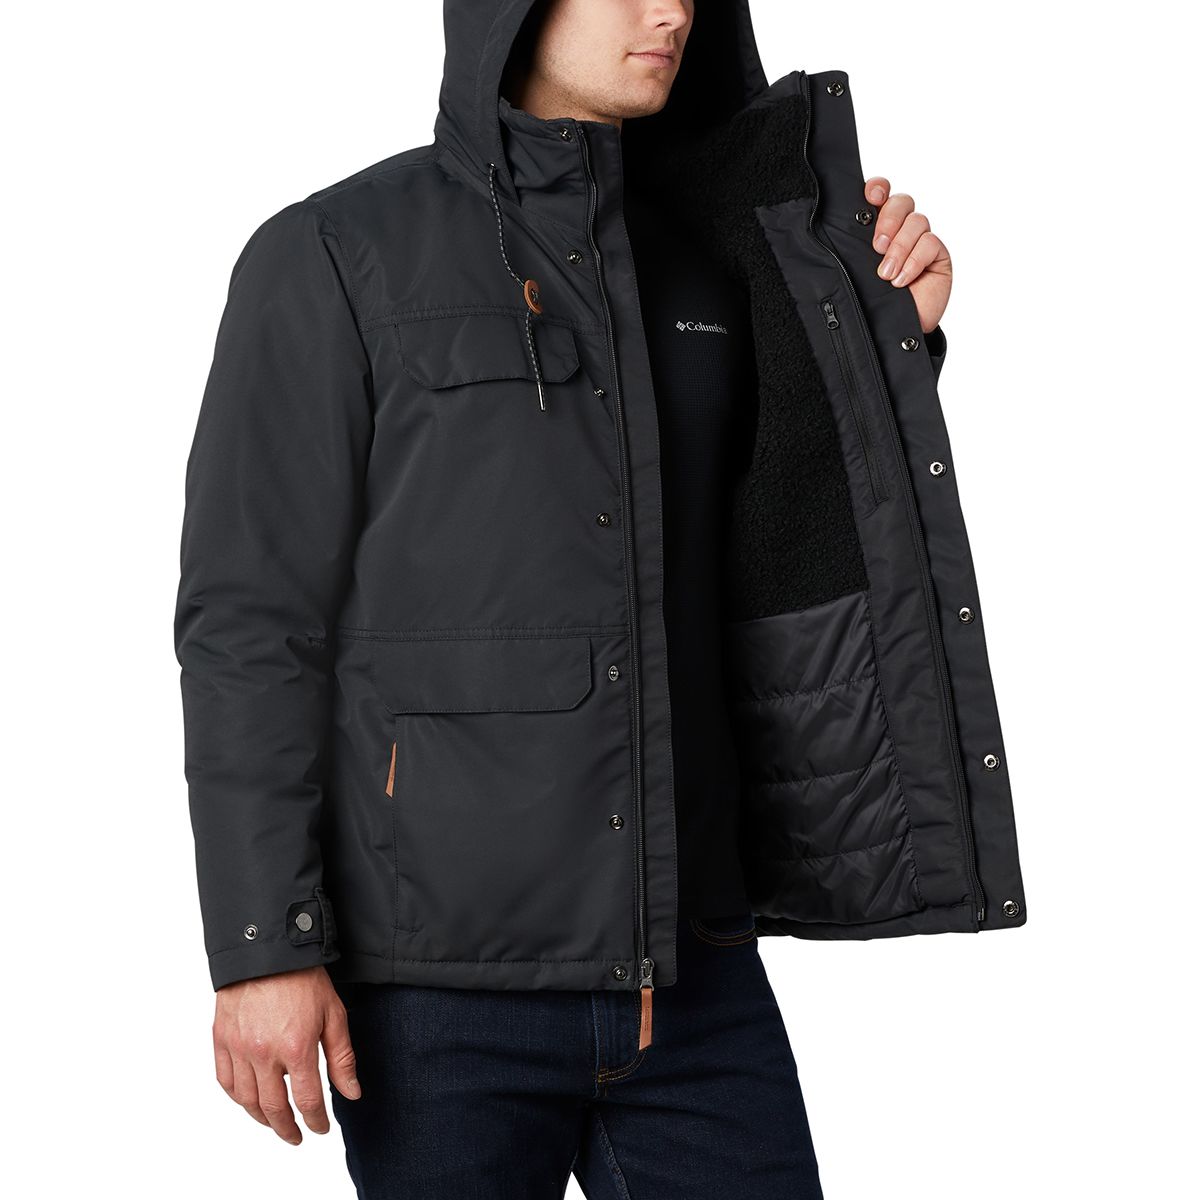 south canyon lined jacket columbia